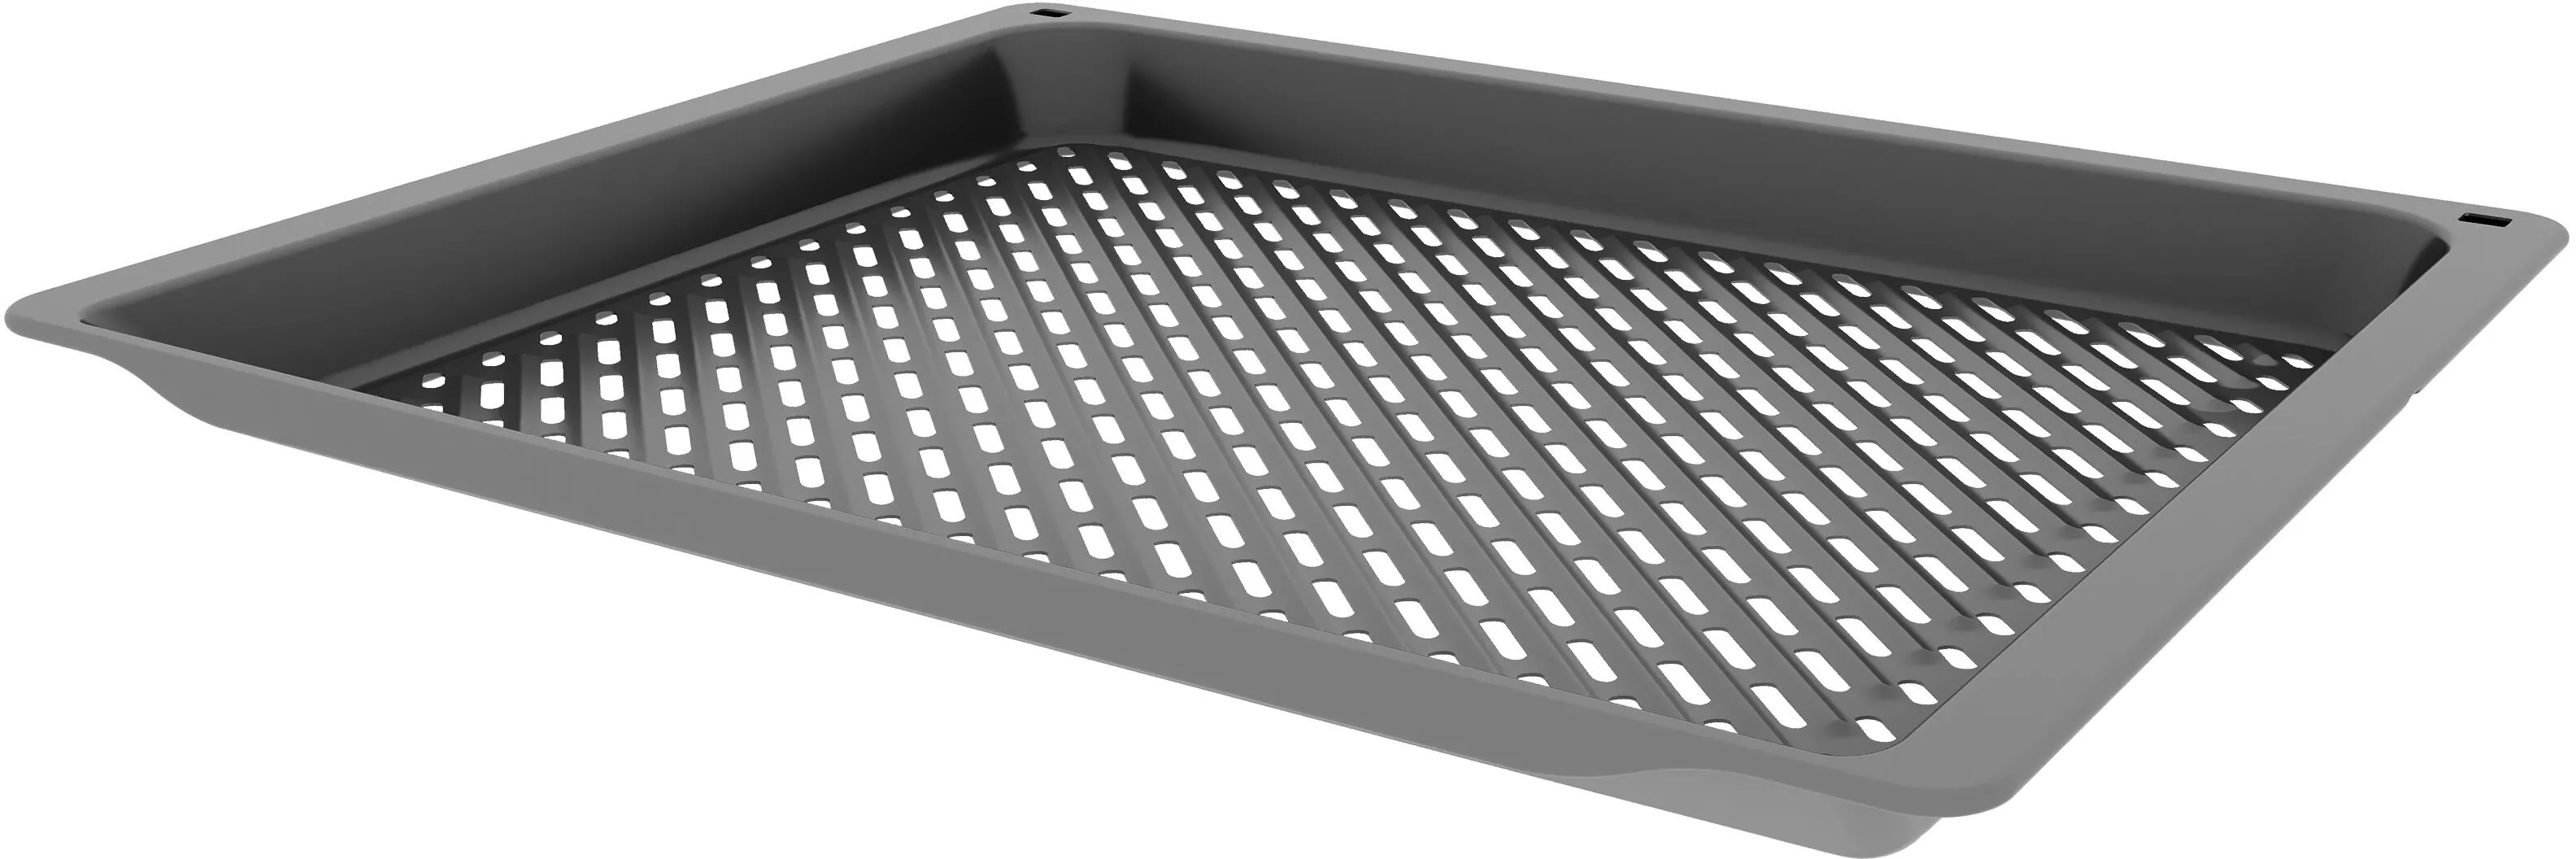 Grill tray AirFry tray, 35 x 455 x 375 mm, anthracite enamelled 